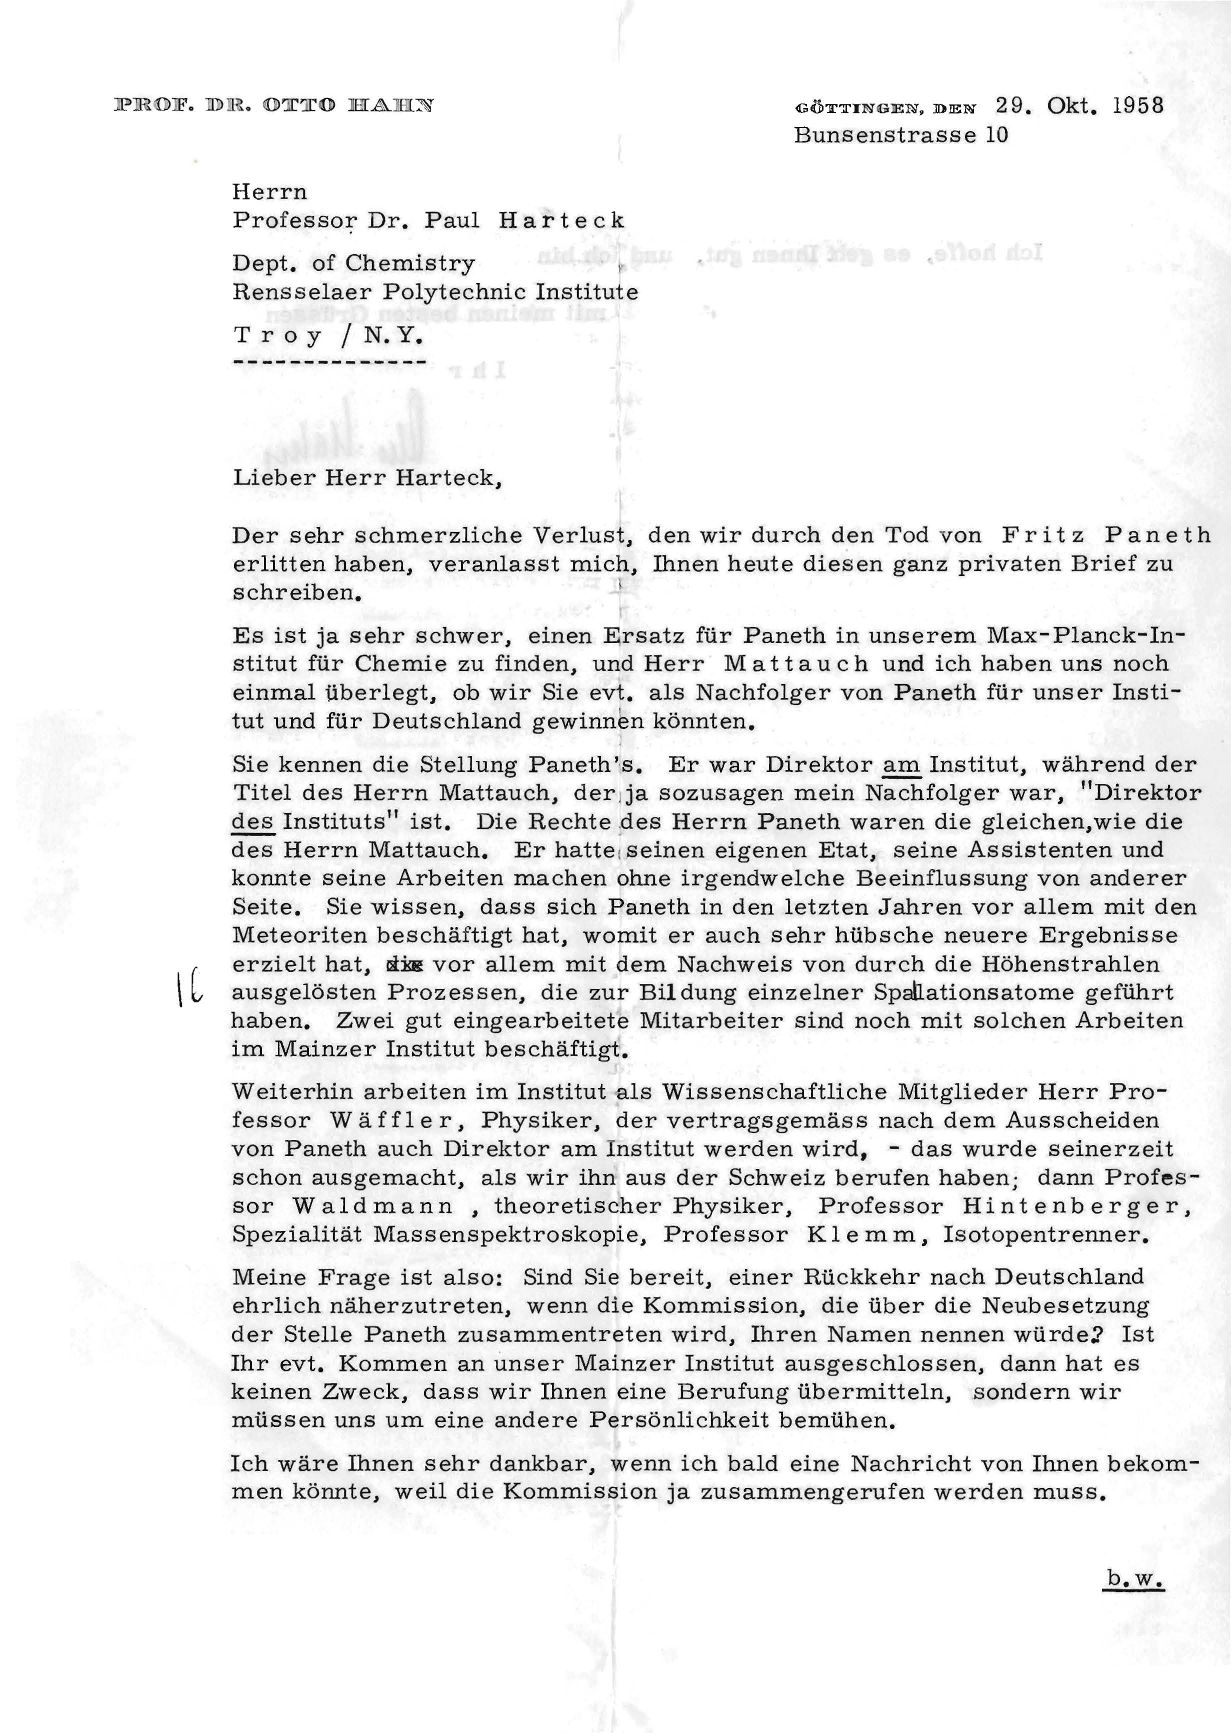 Letter to Paul Harteck from Dr. Otto Hahn Regarding a Job Position in Germany